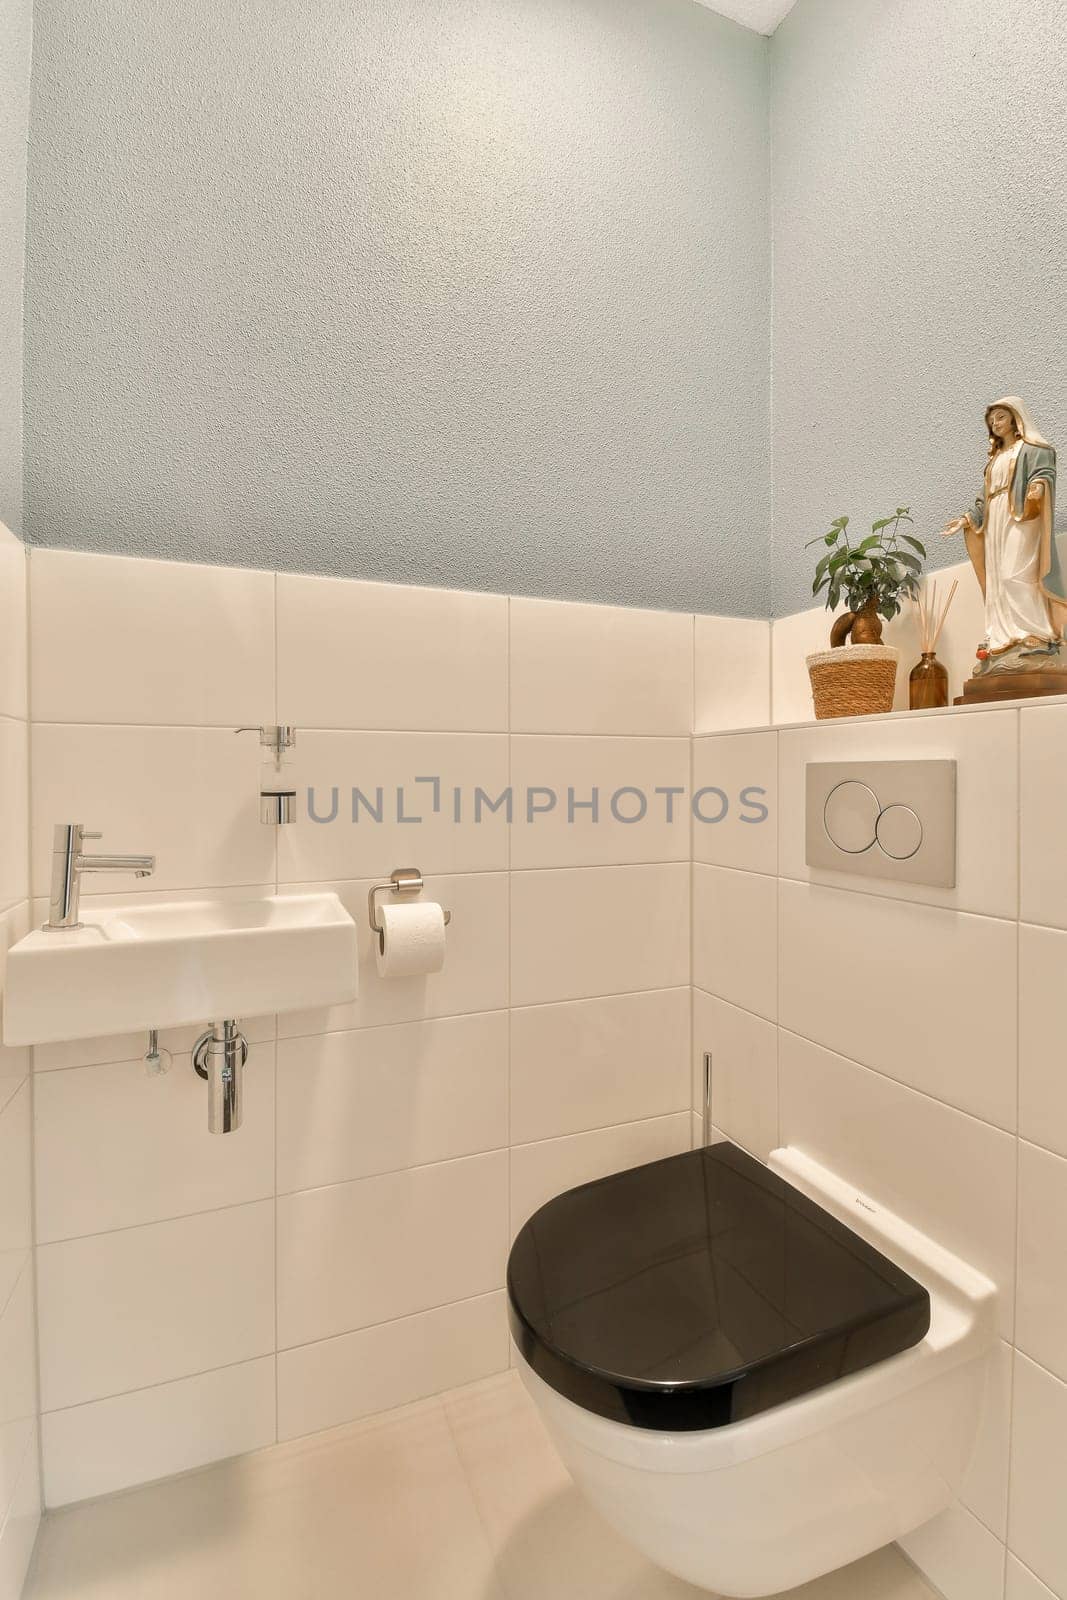 a bathroom with a toilet, sink and plant on the shelf over the toilet bowl in the wall is white